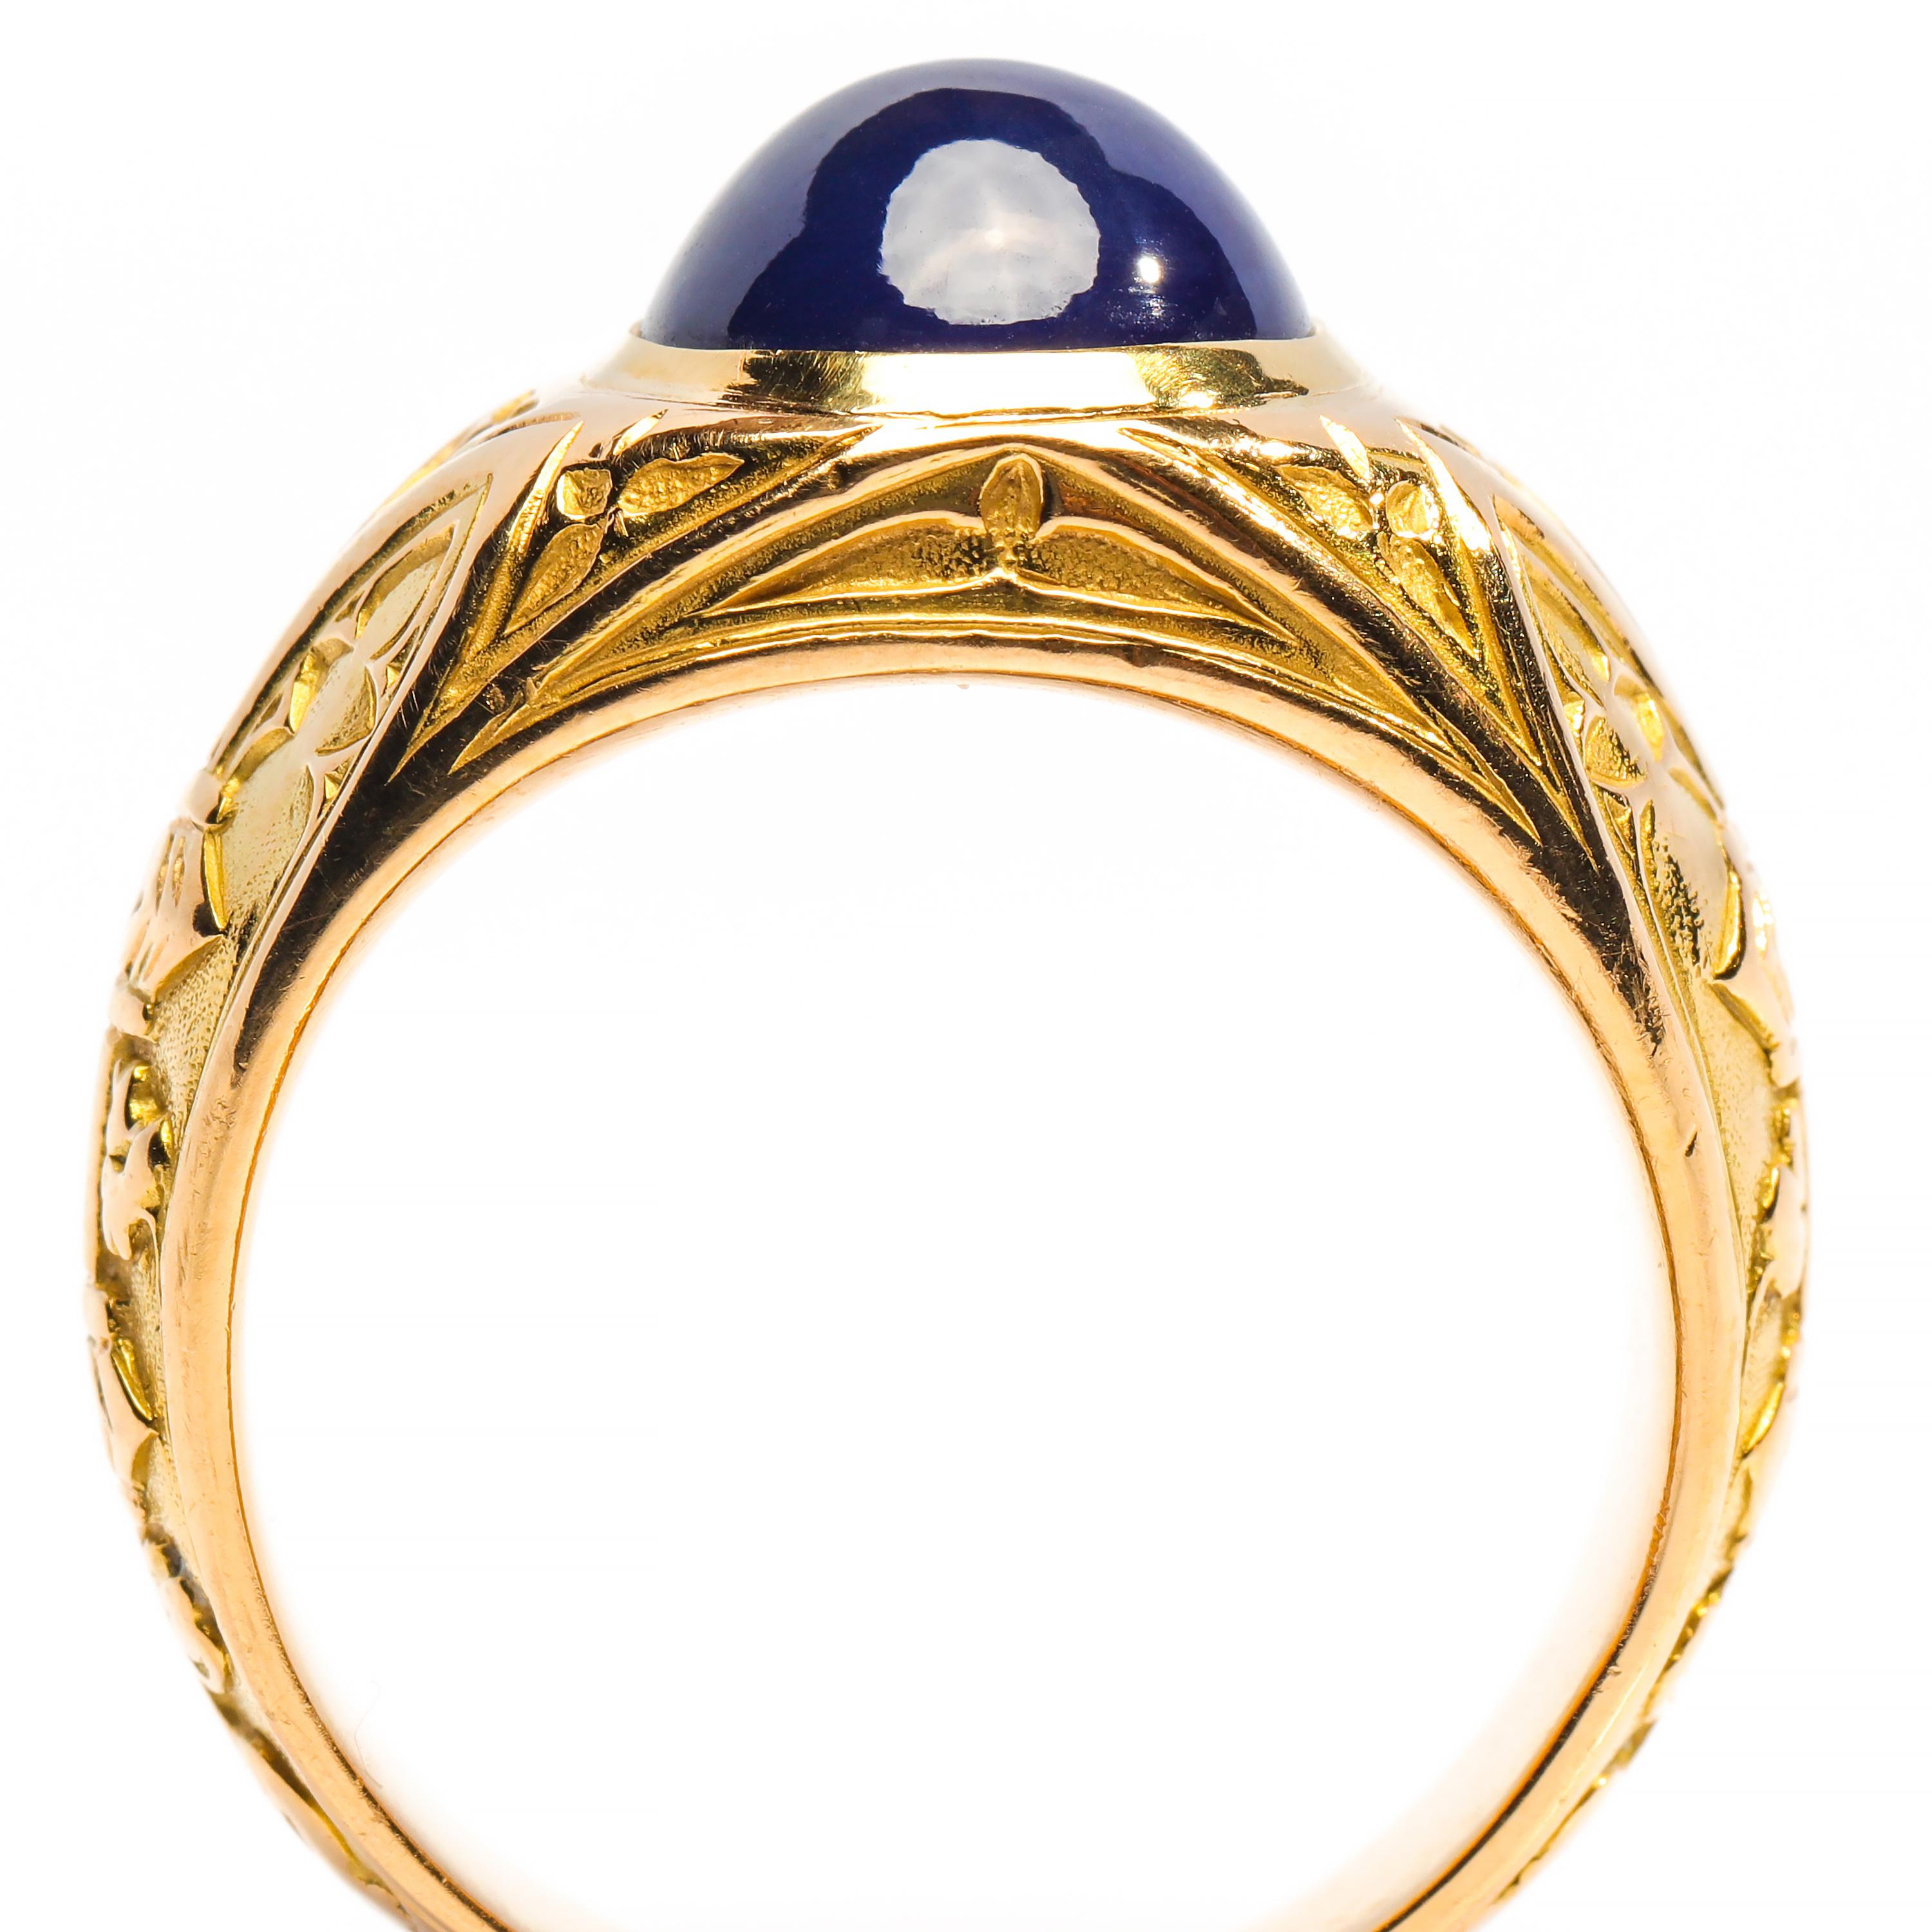 Tiffany & Co. Gilded Age Men's Sapphire Ring as Featured in the New York Times 3